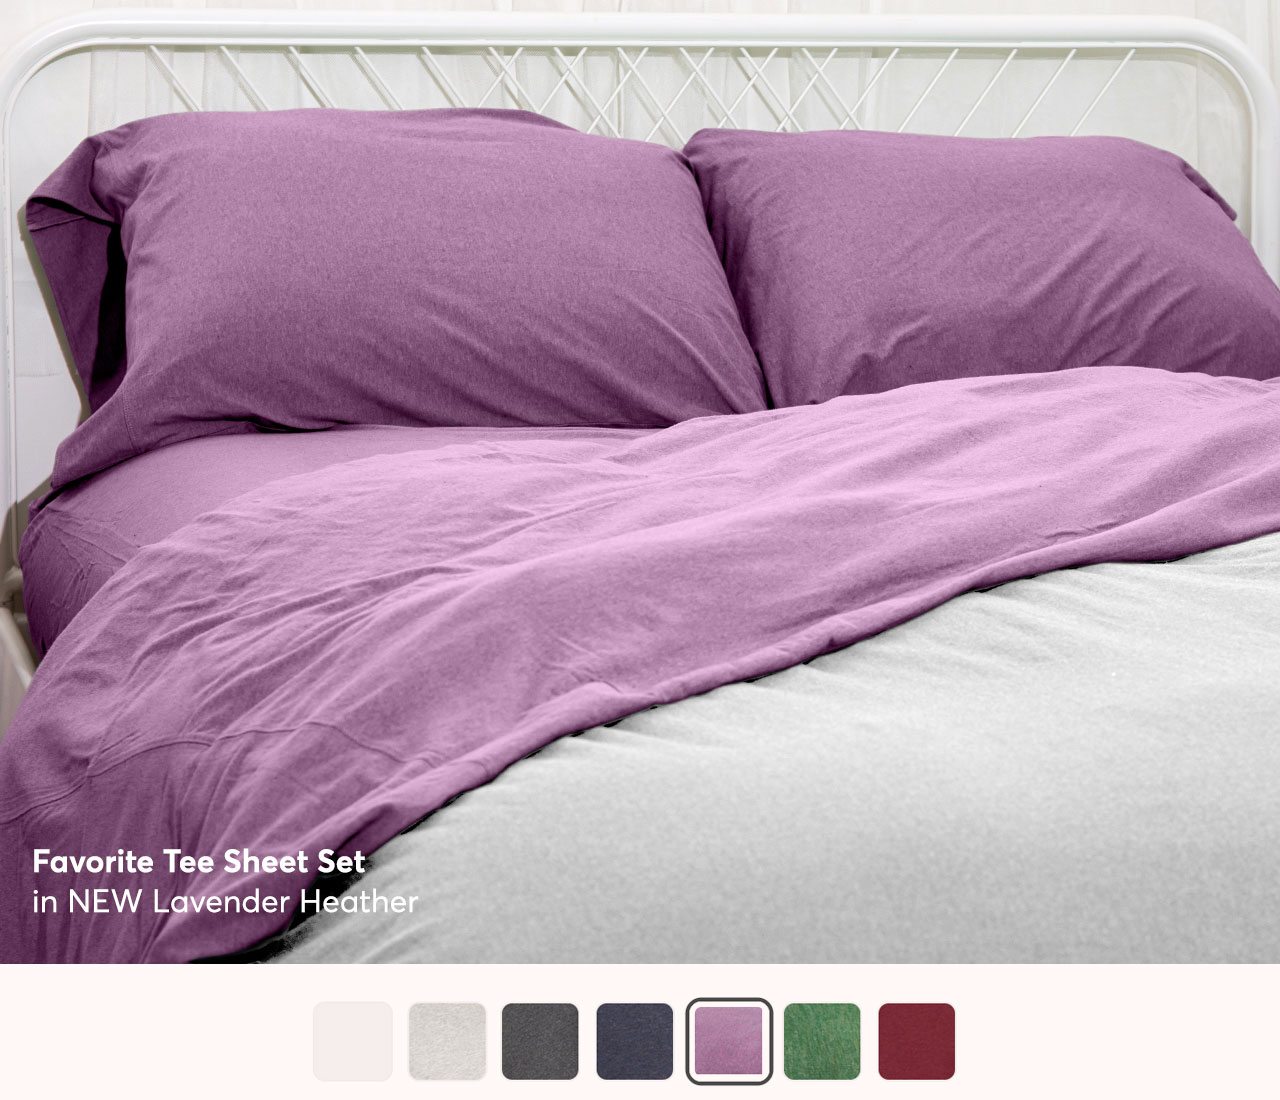 Favorite Tee Sheet Set in our new color, Lavender Heather